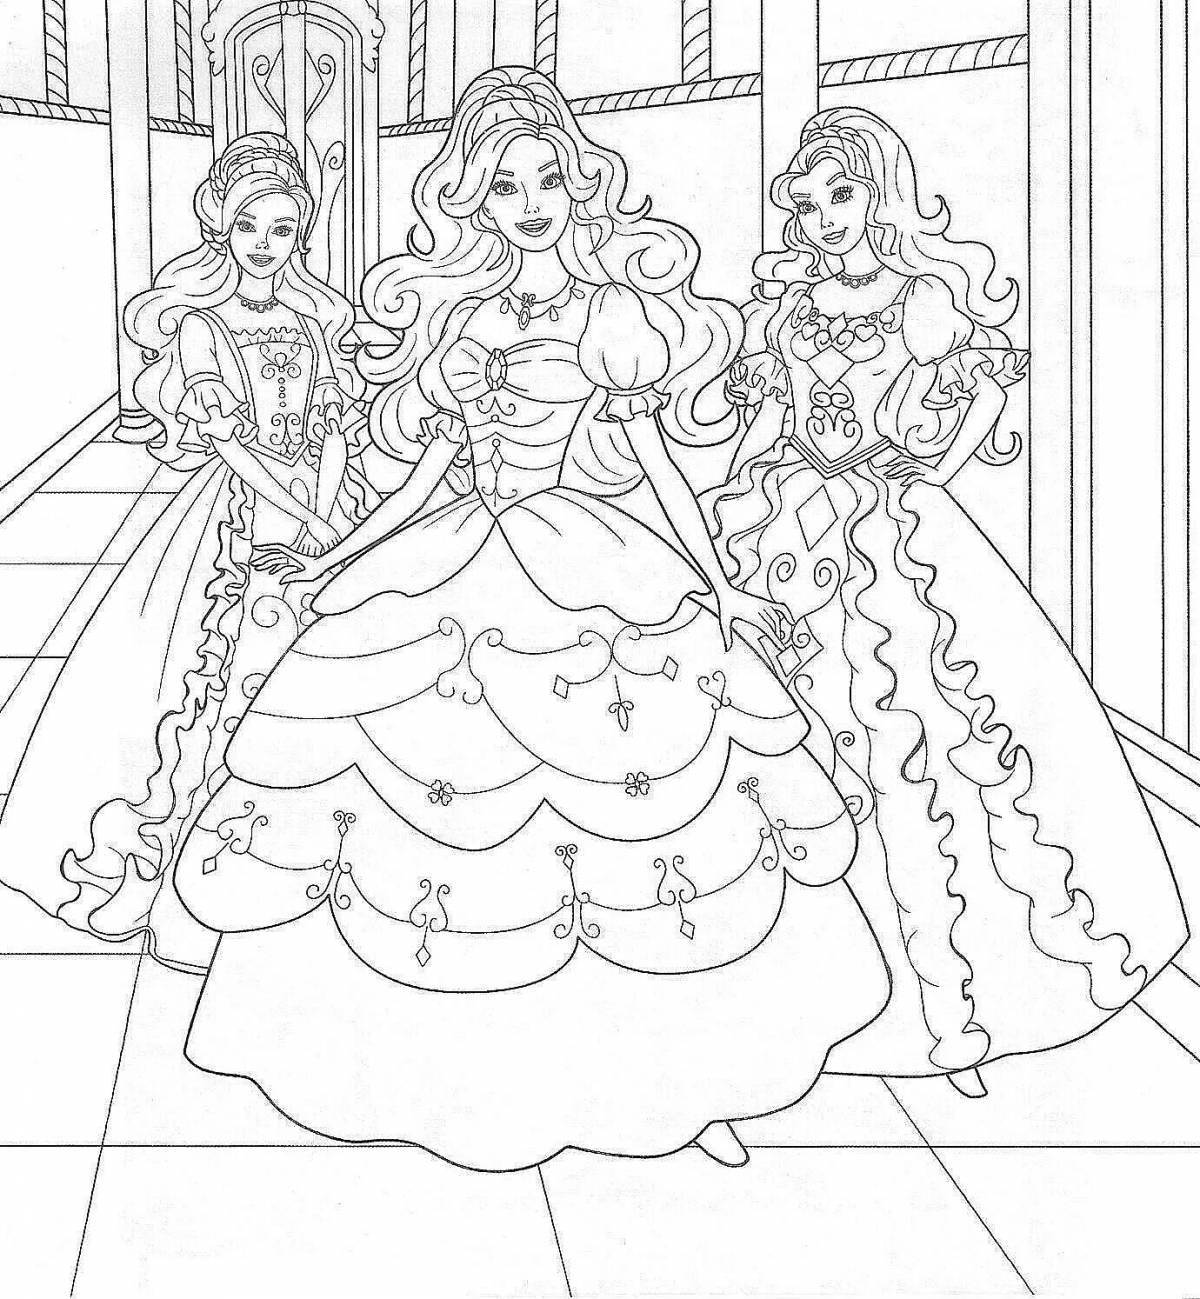 Amazing coloring pages of barbie dolls